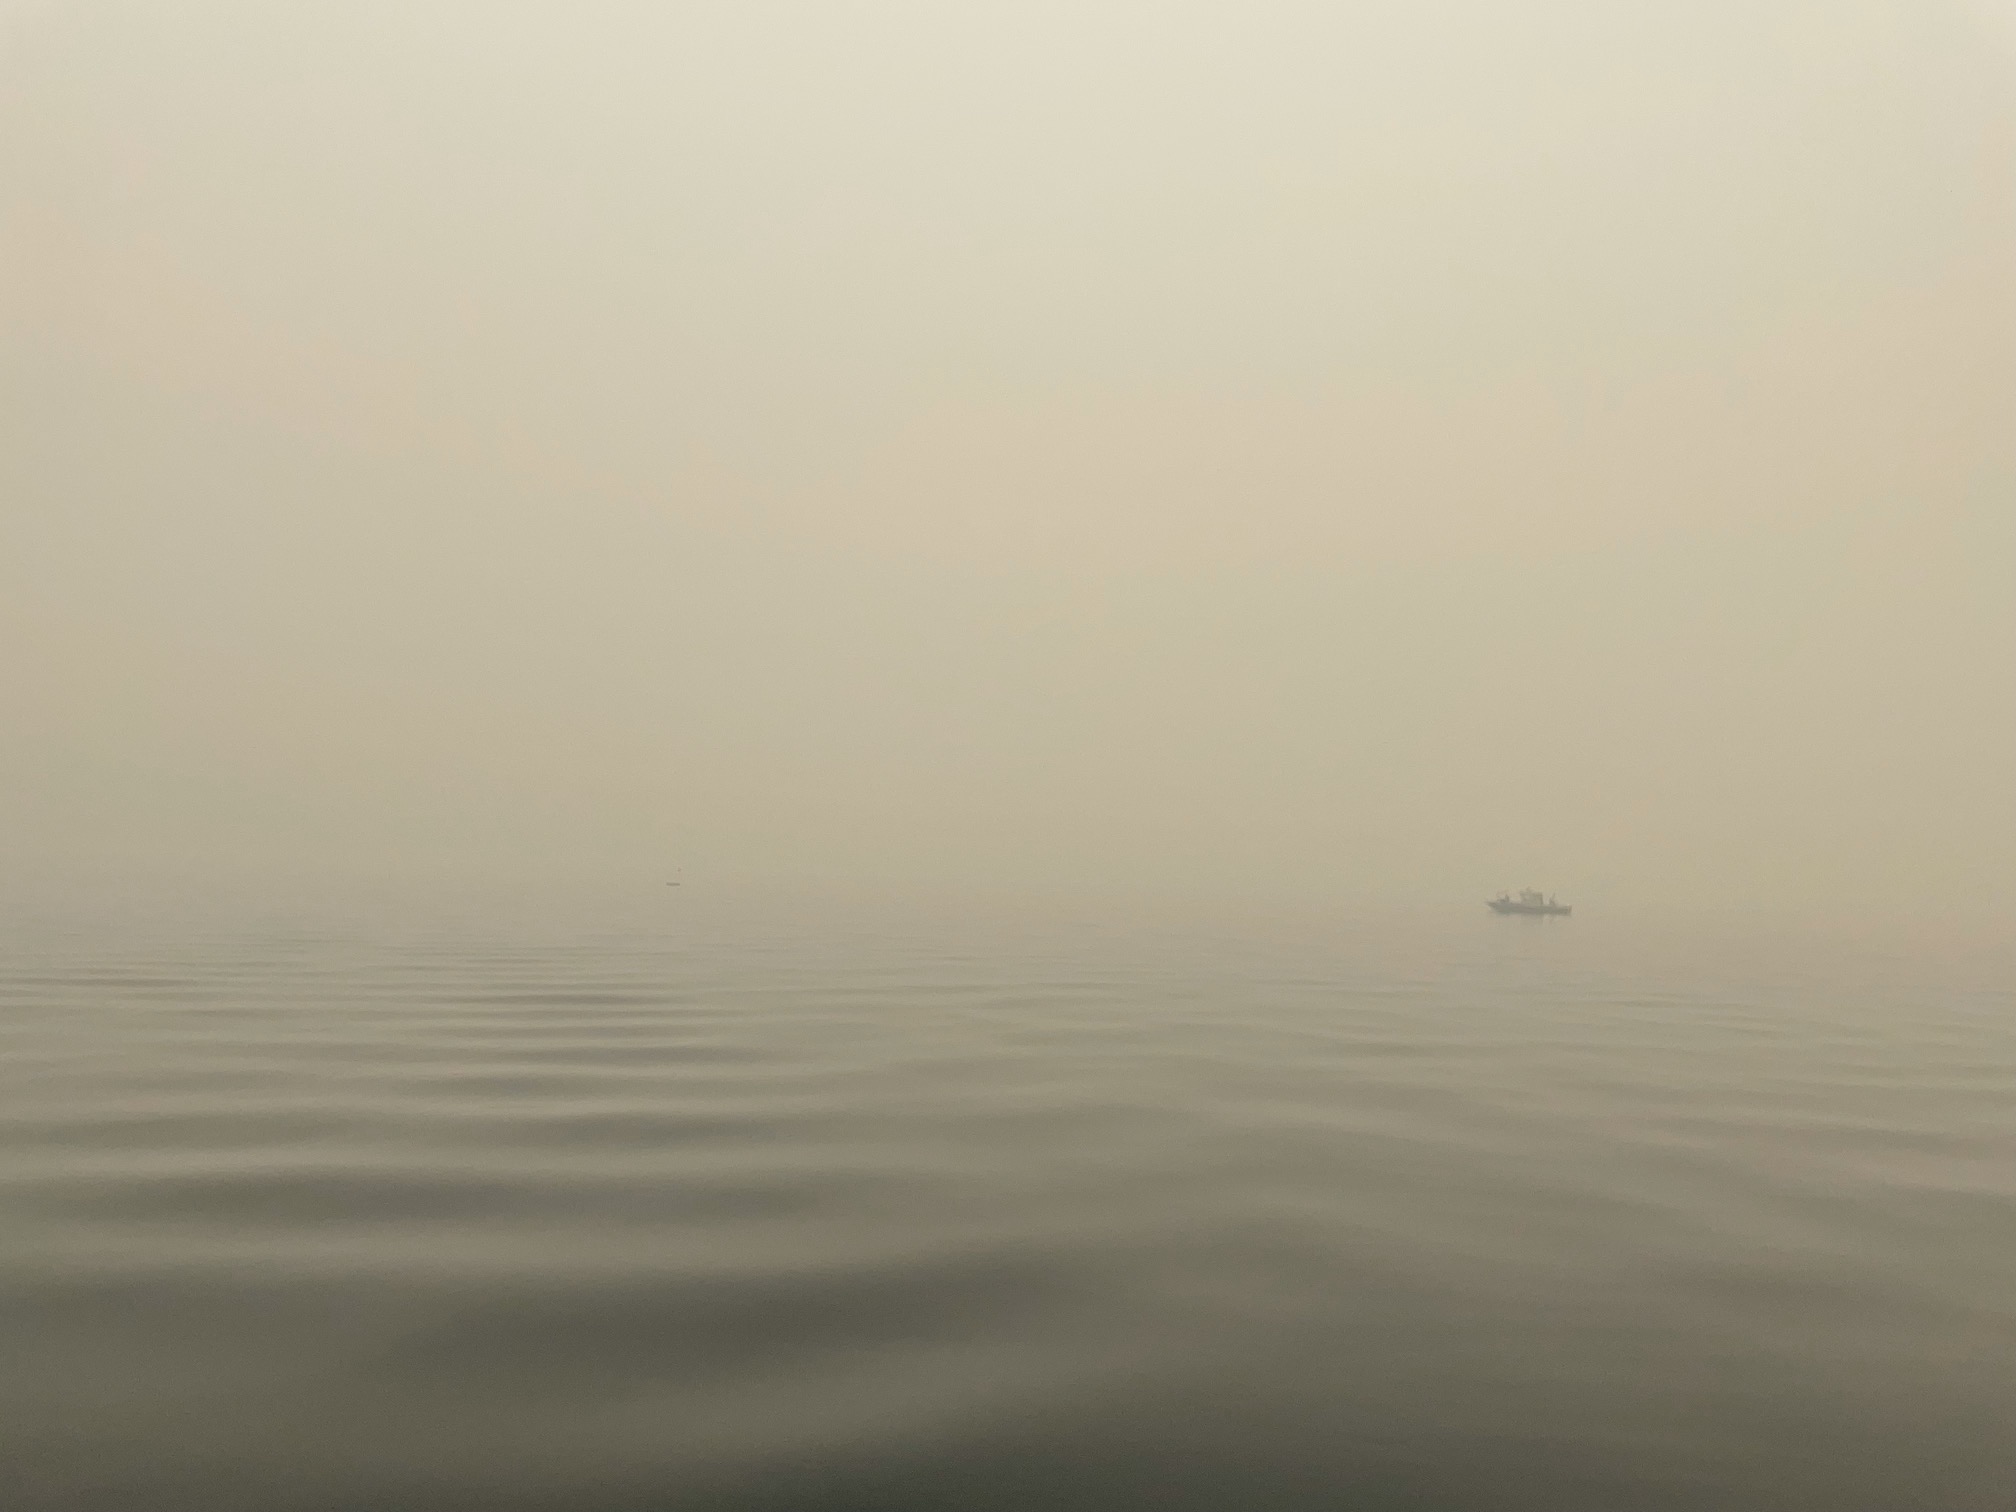 Smoke and haze inundate the air above the surface of Lake Tahoe in August 2021